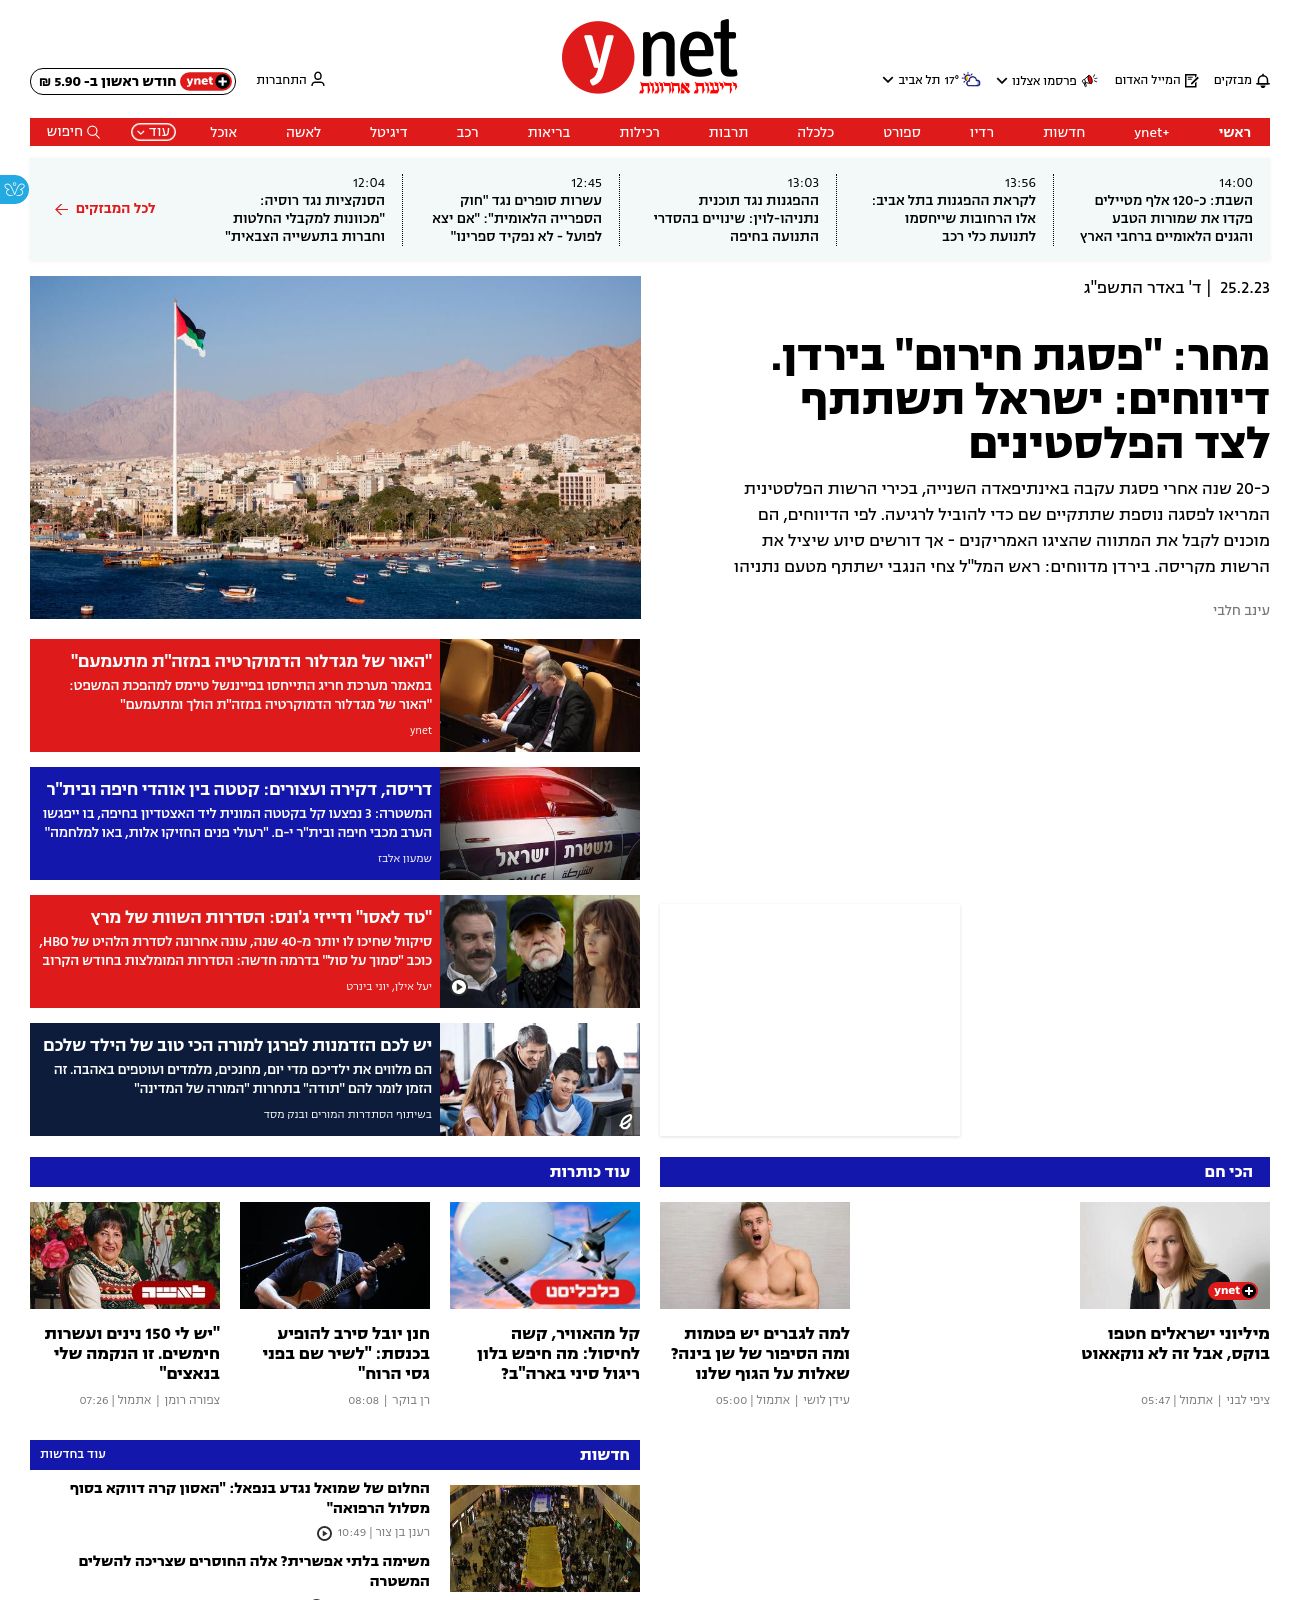 Ynet at 2023-02-25 17:13:41+02:00 local time